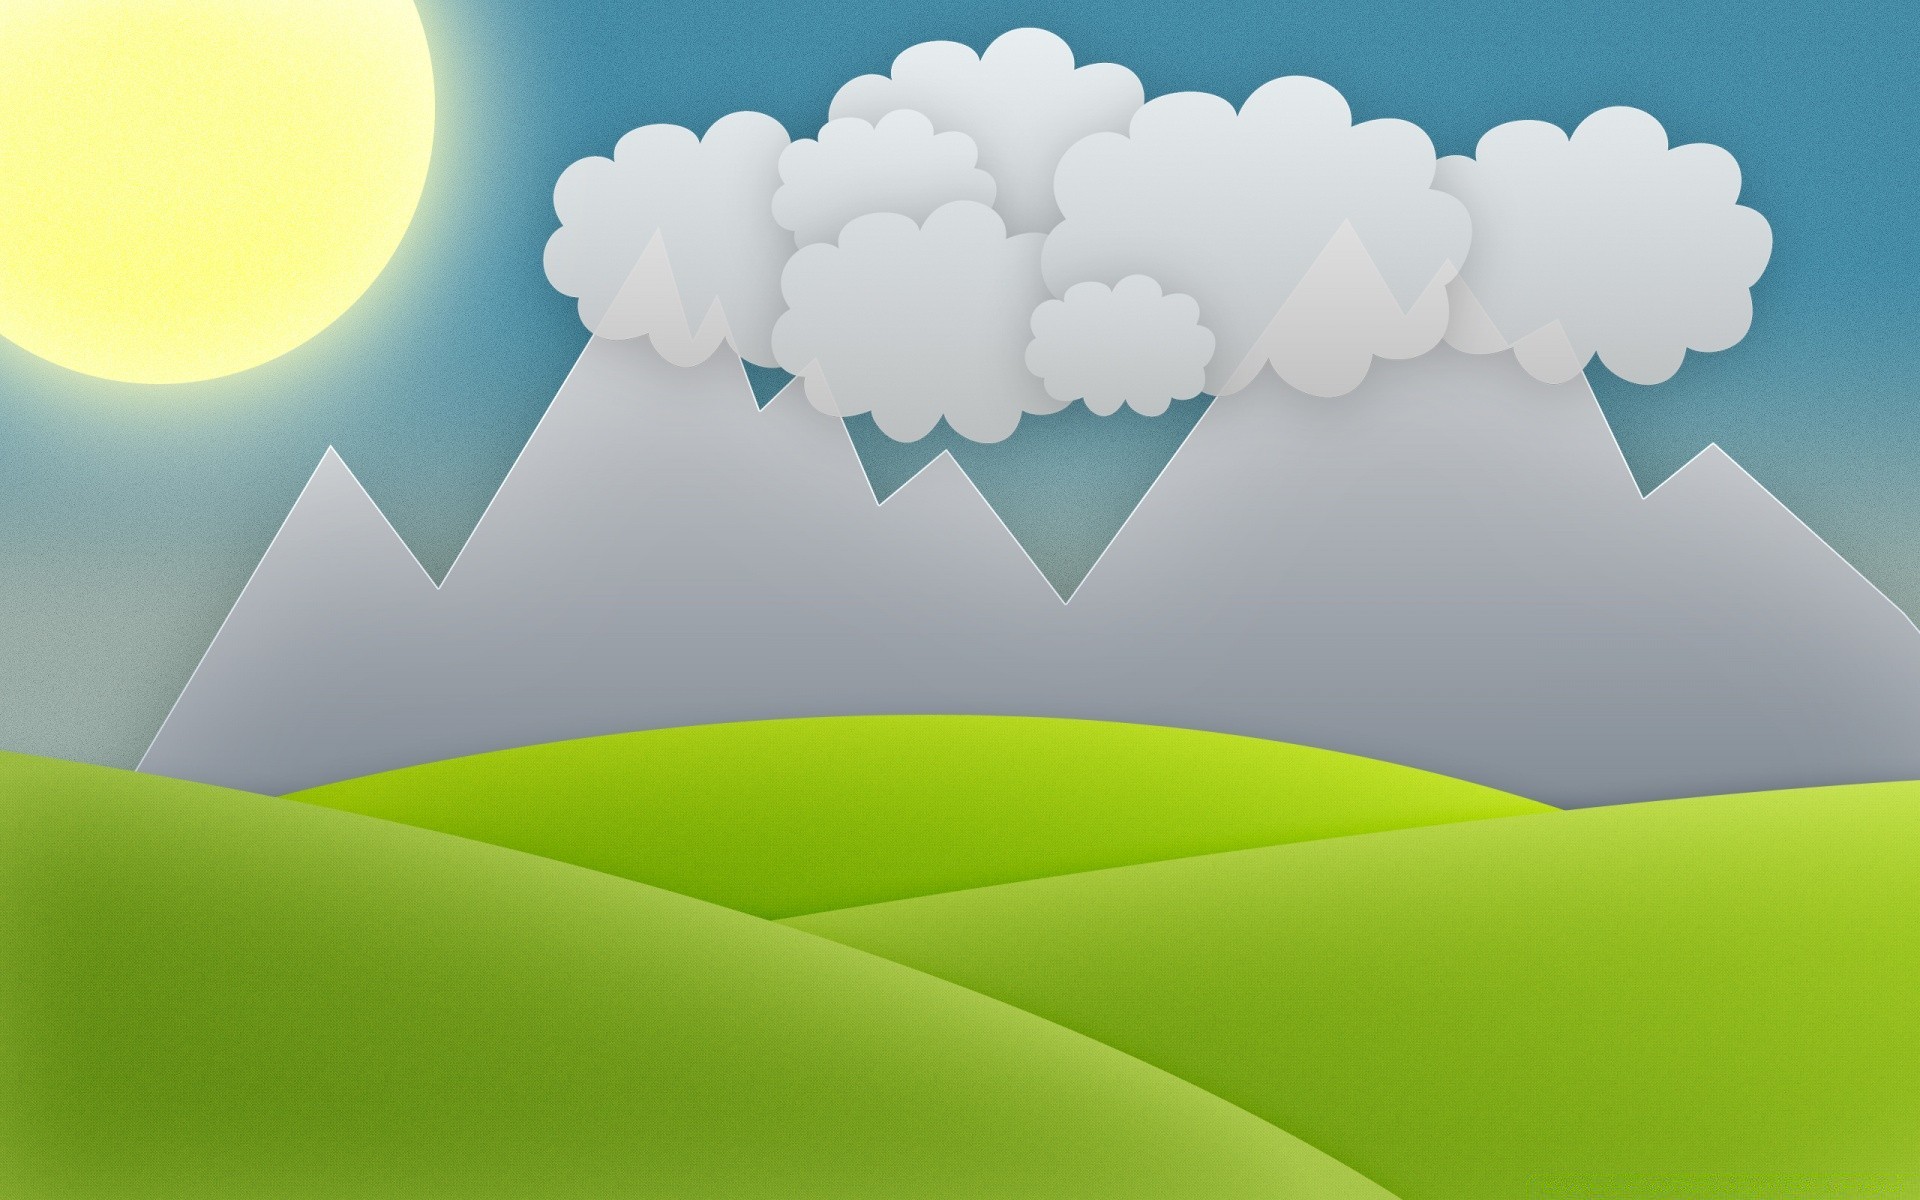 Nature image in the form of vector graphics wallpaper